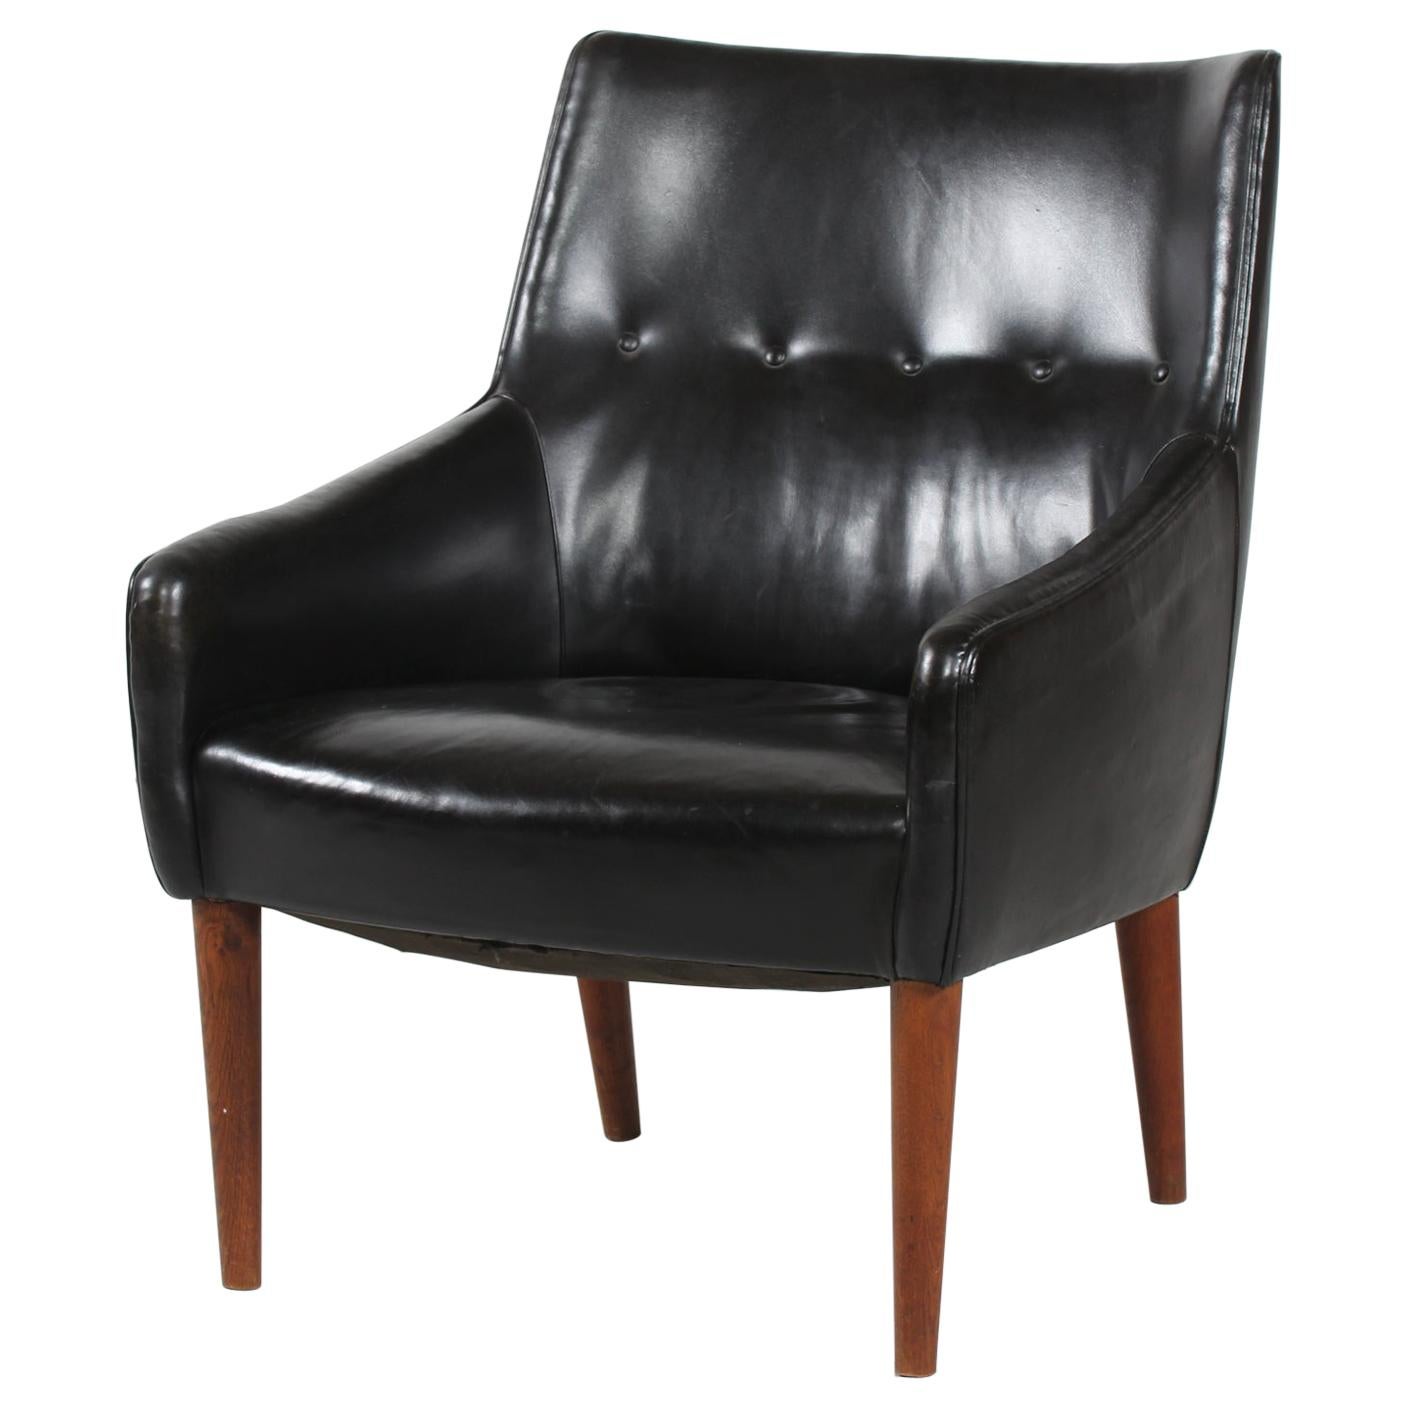 Danish Modern Small Easy Chair with Black Faux Leather by Danish Furniture Maker